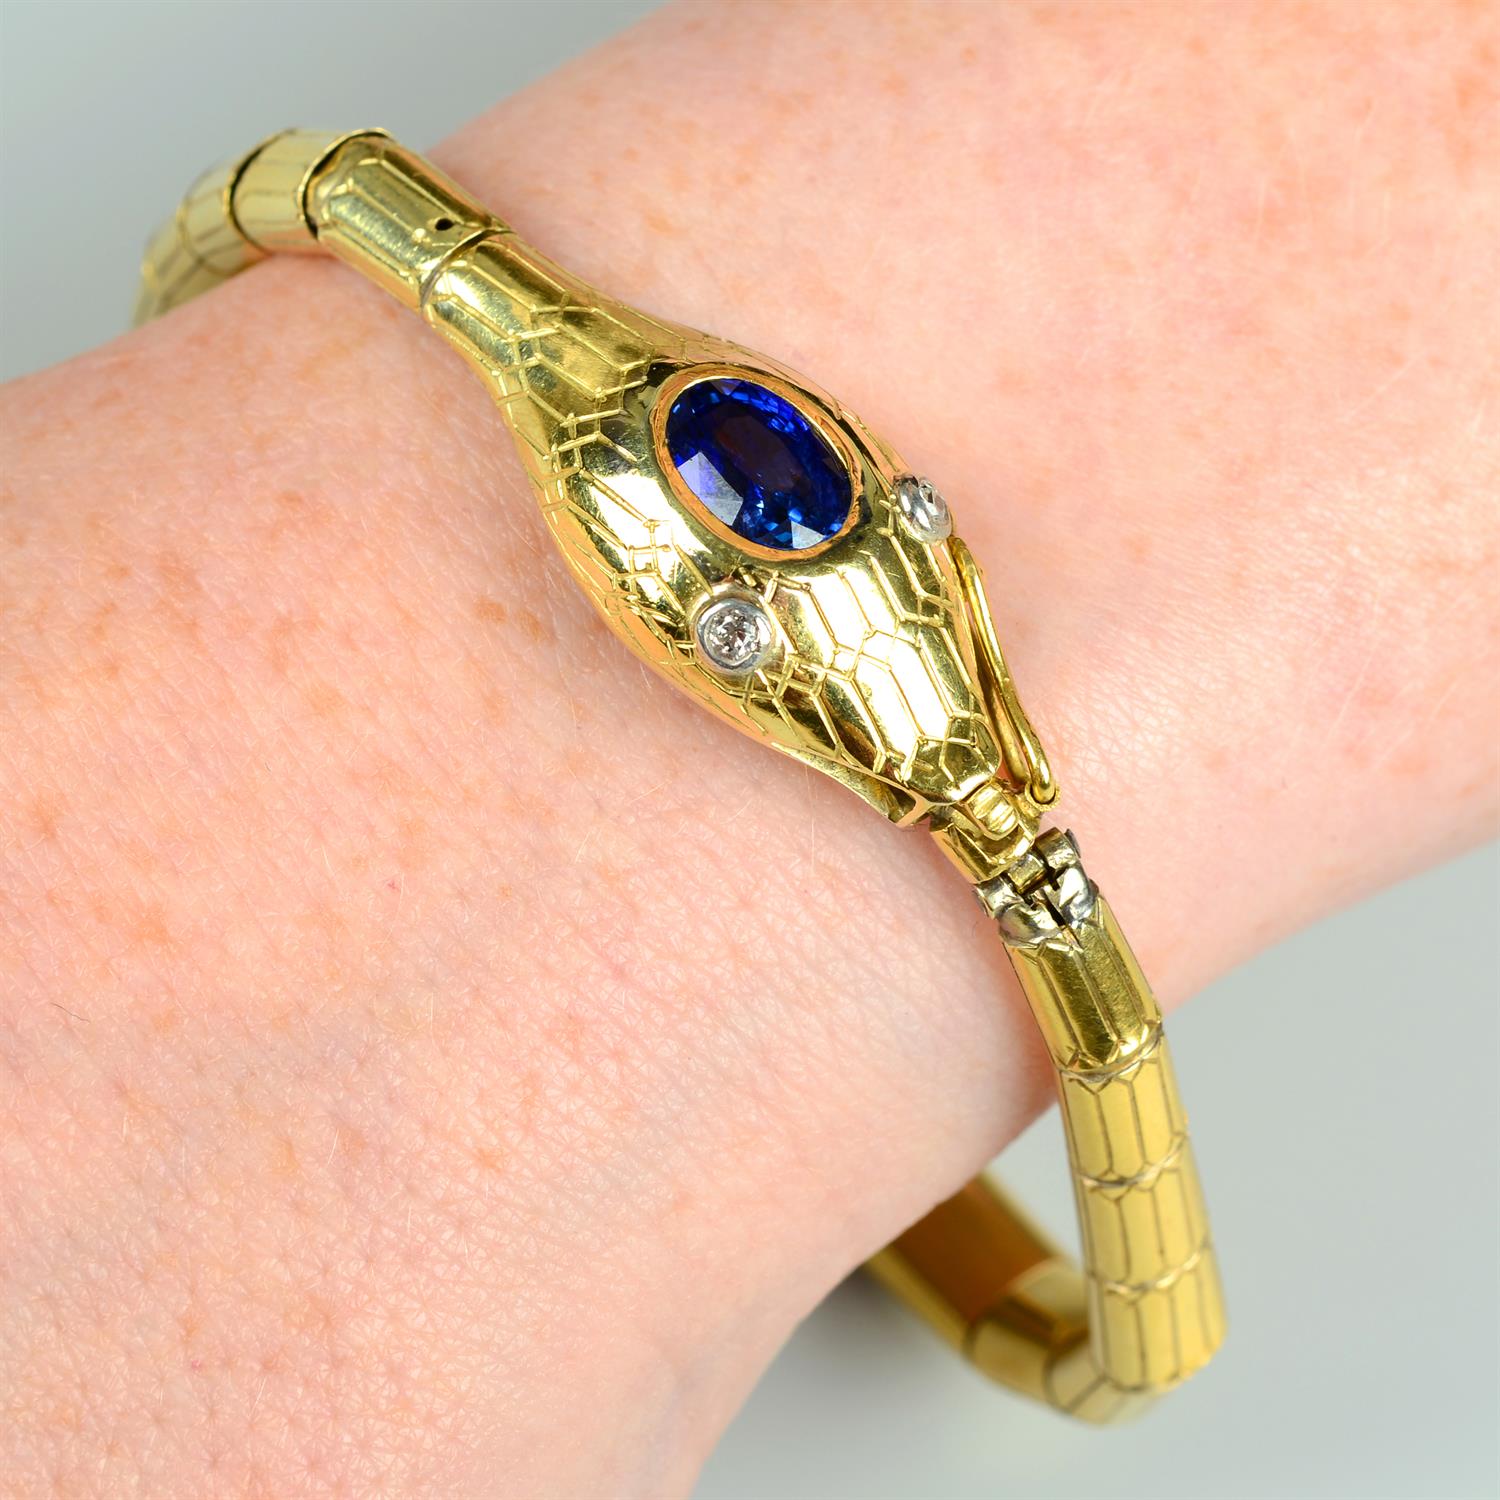 A 19th century gold snake bracelet, with sapphire crest and old-cut diamond eyes.